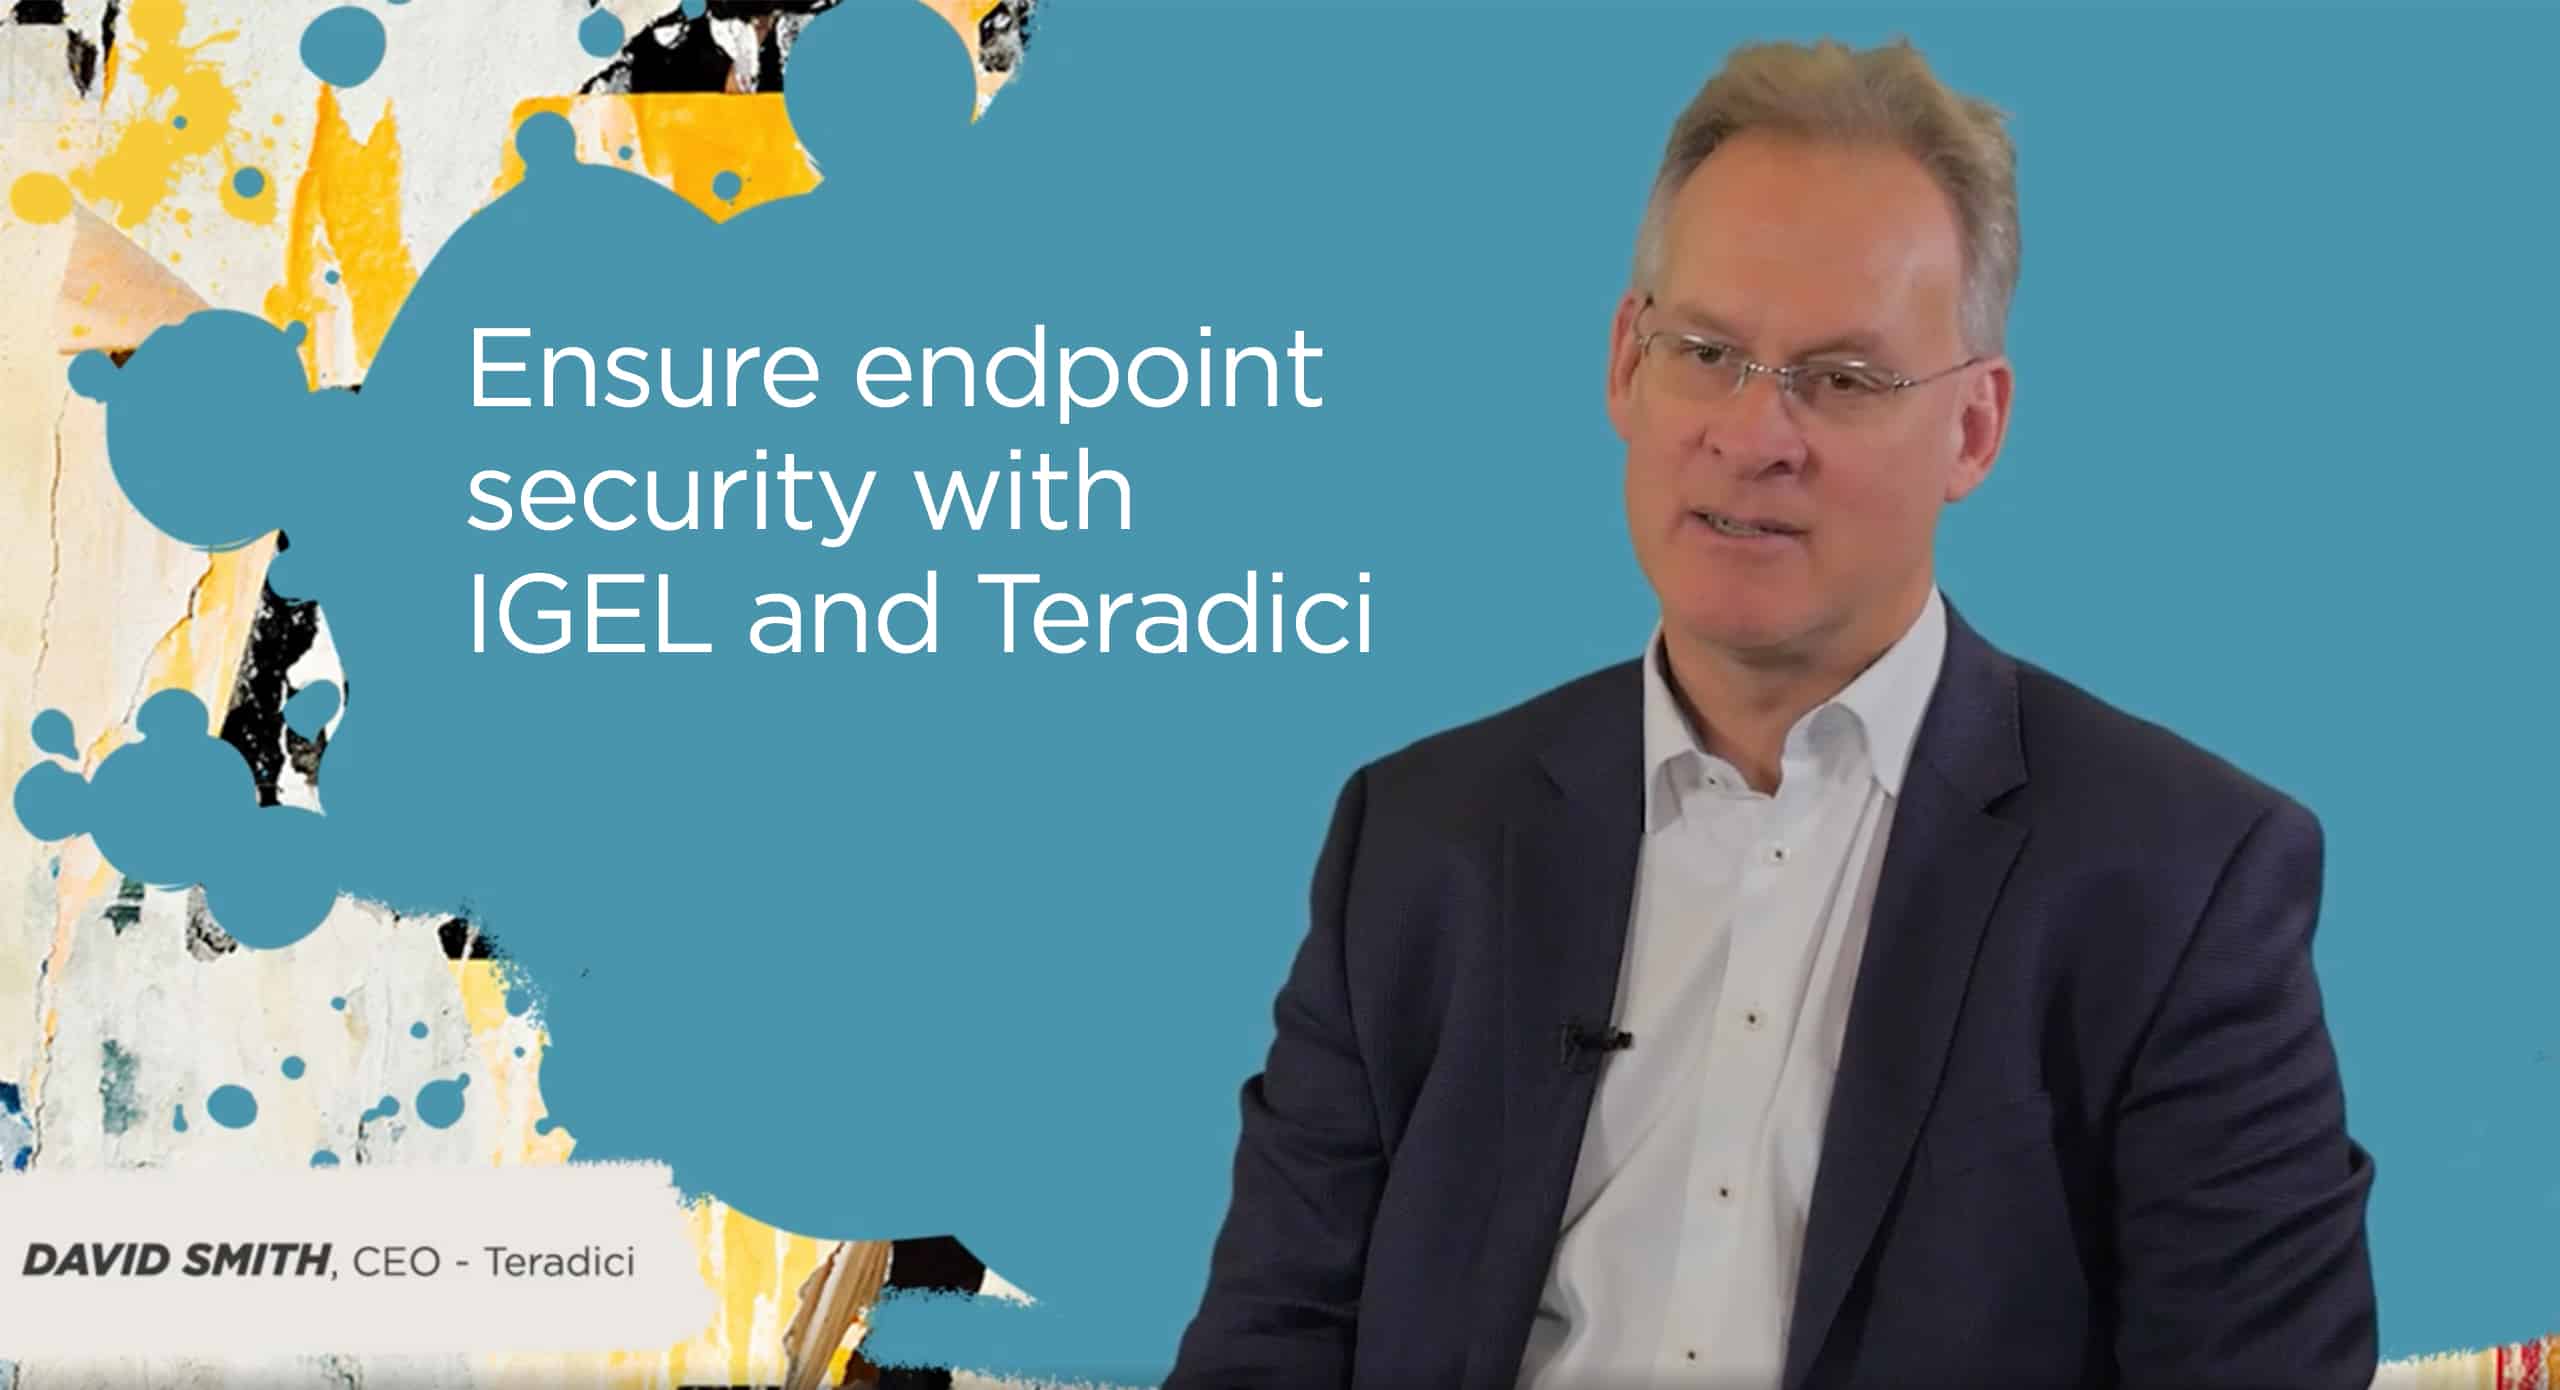 Ensure endpoint security with IGEL and Teradici